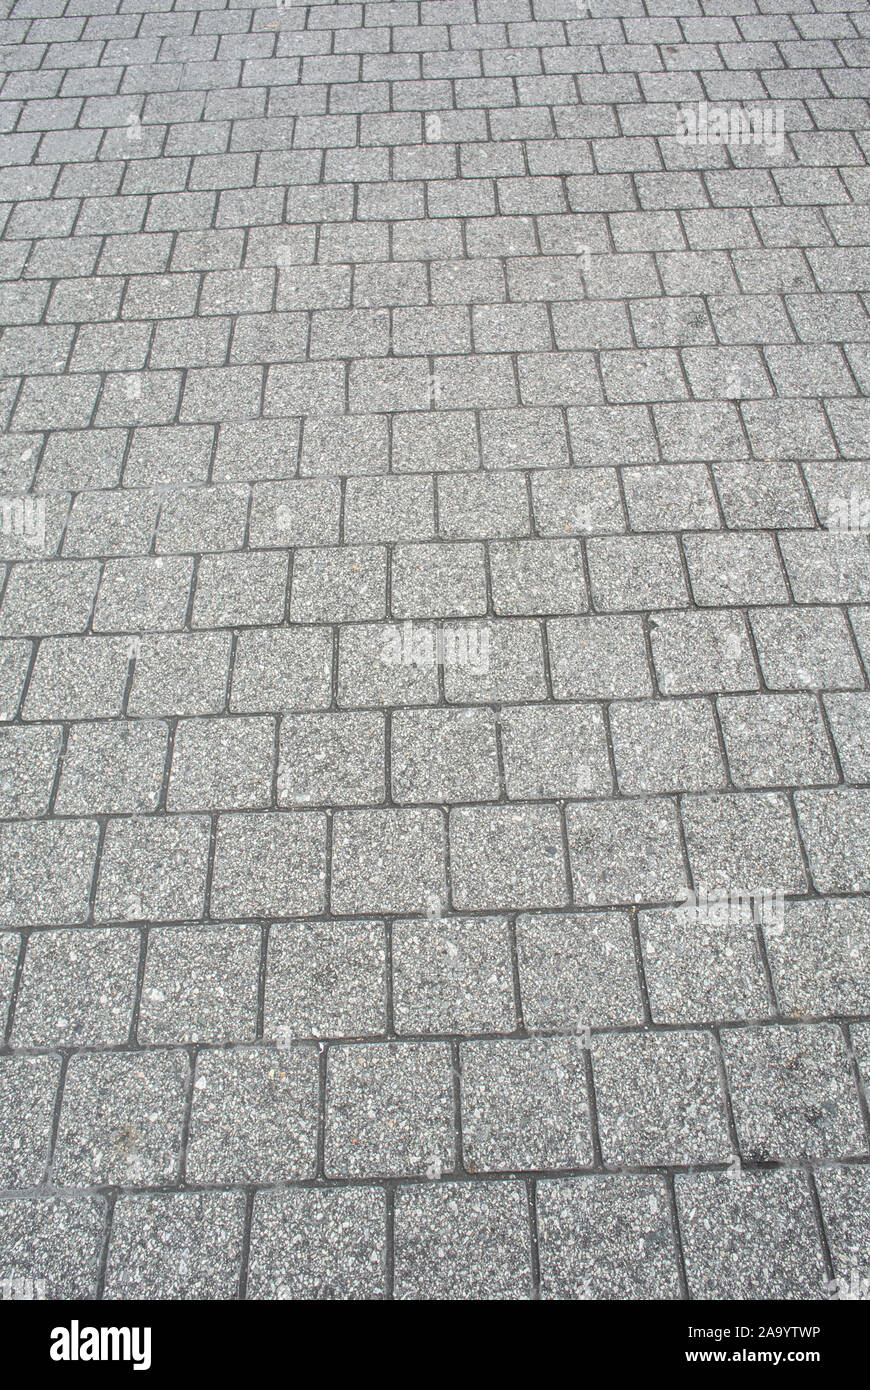 Gray Square Texture Or Porous Tile Pavement Or Floor Background